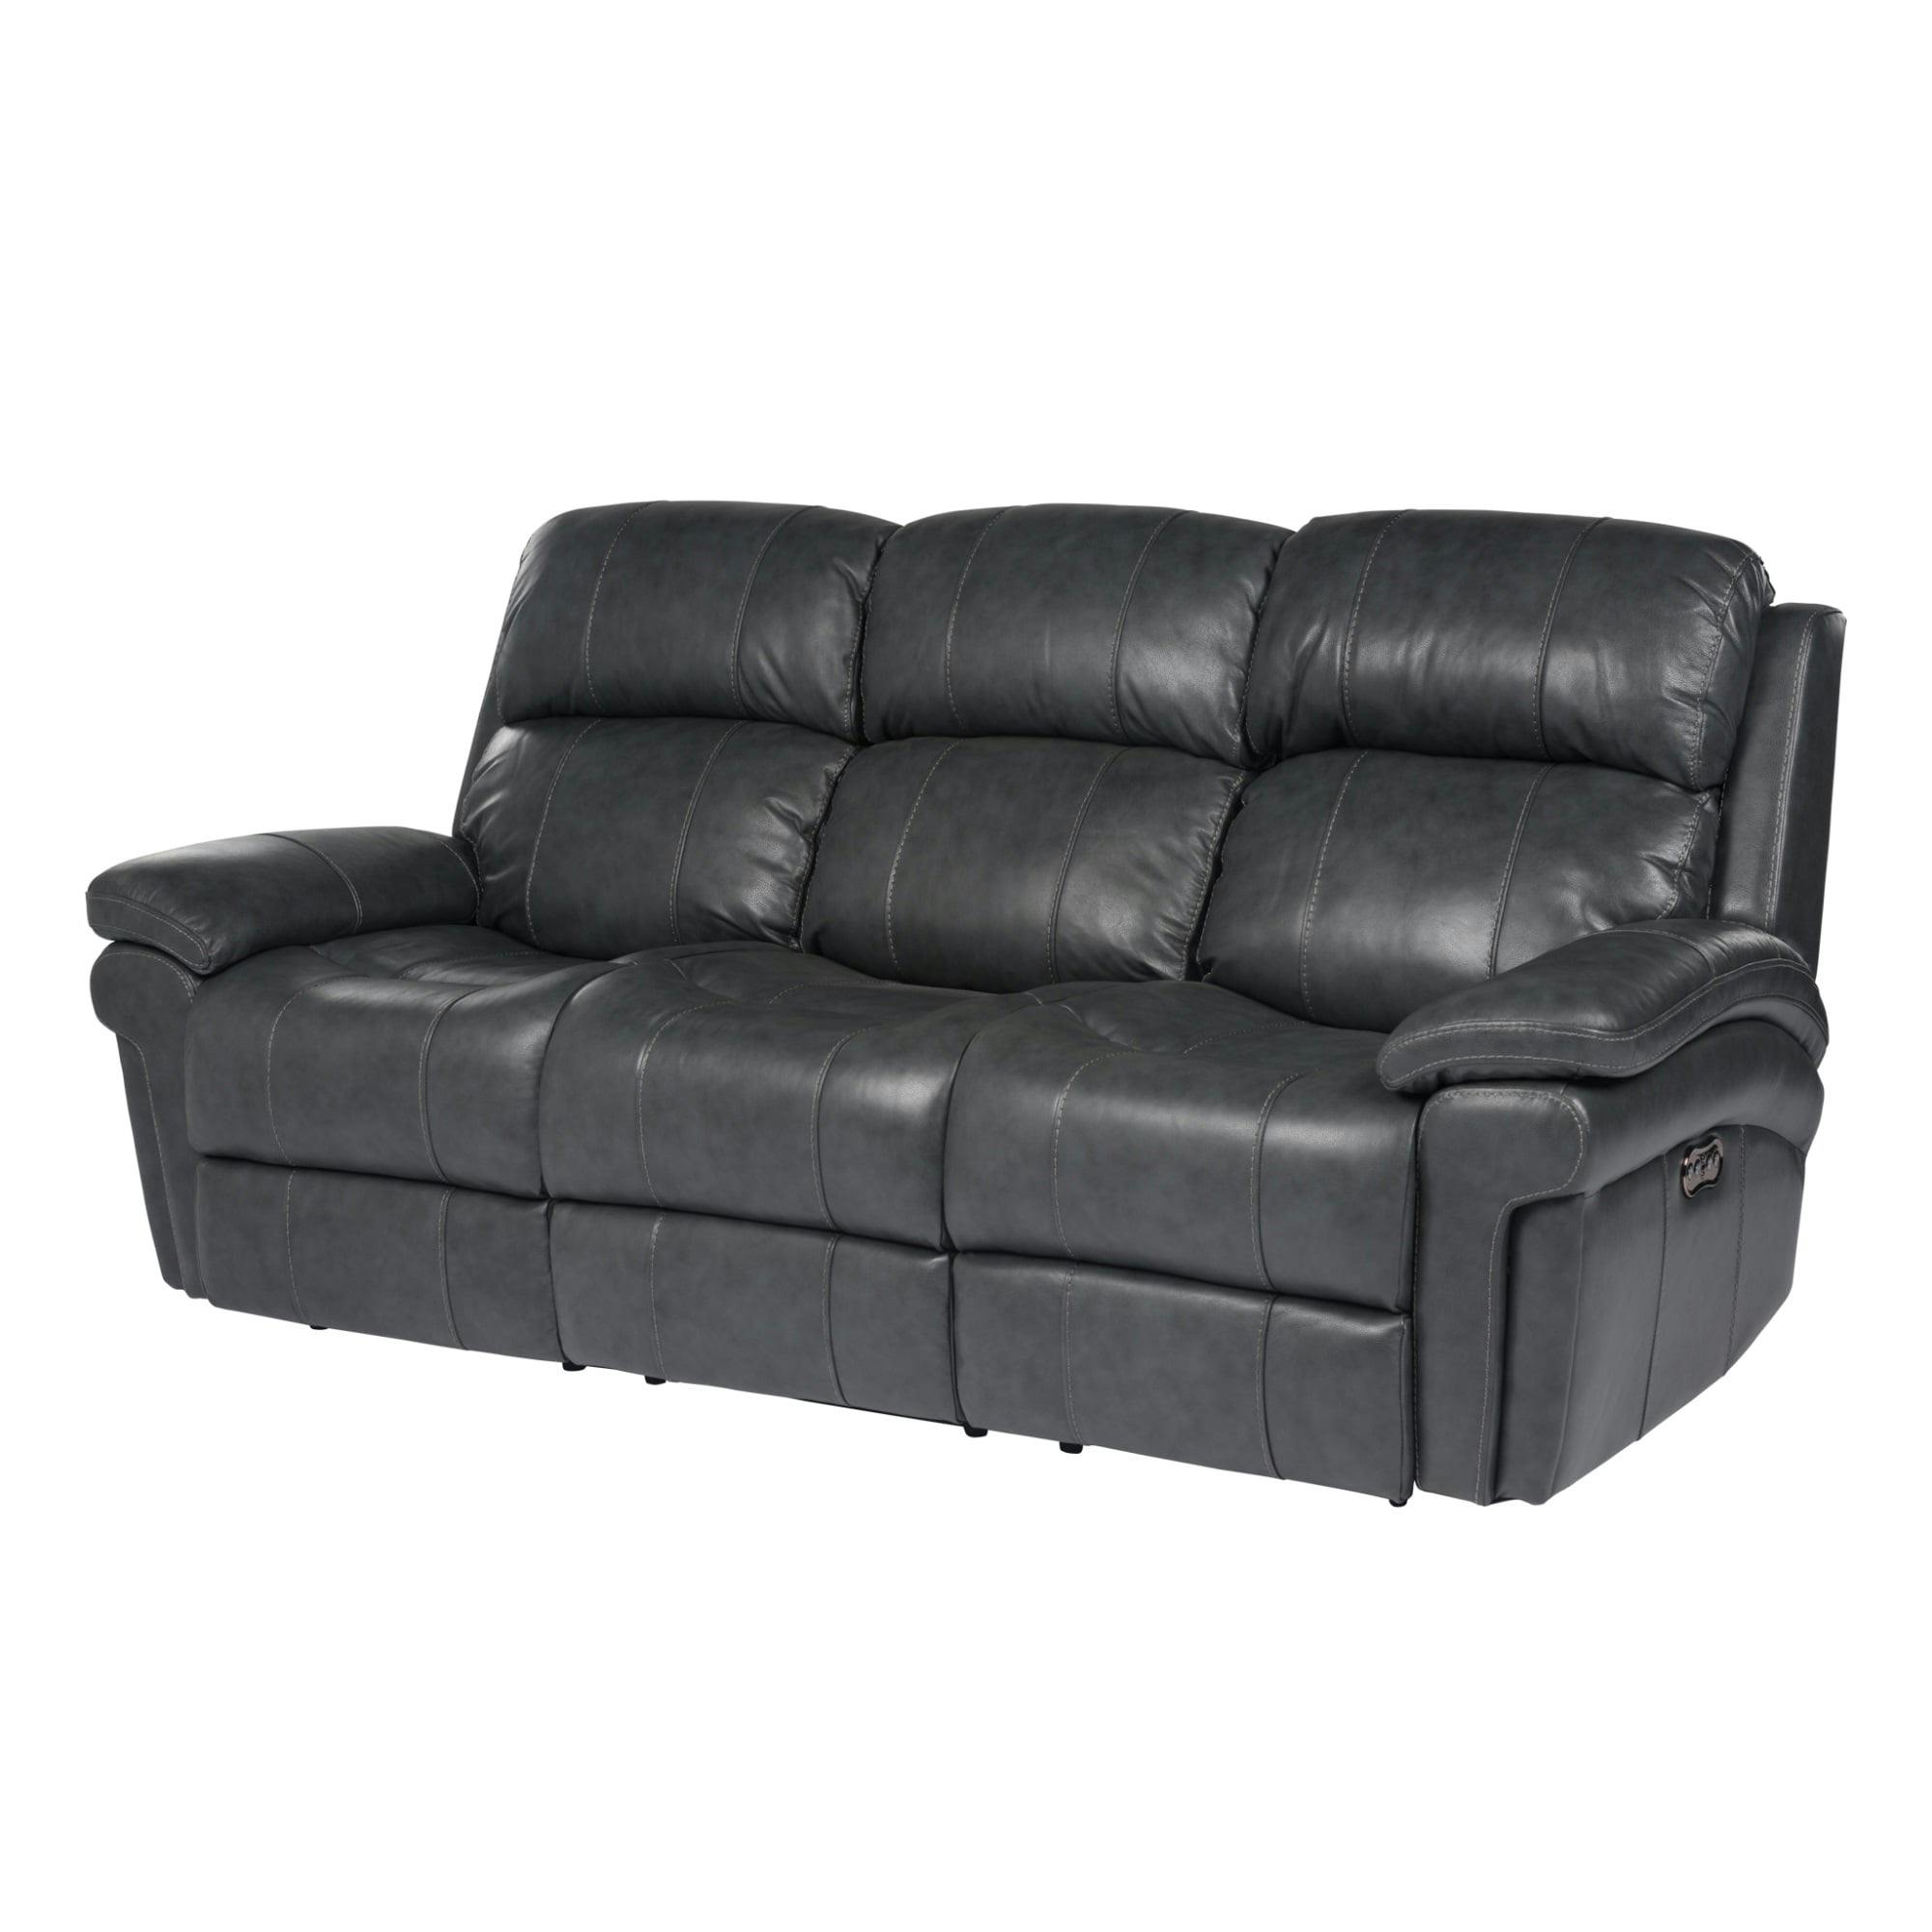 Luxurious Gray Leather Reclining Sofa with Power Headrest